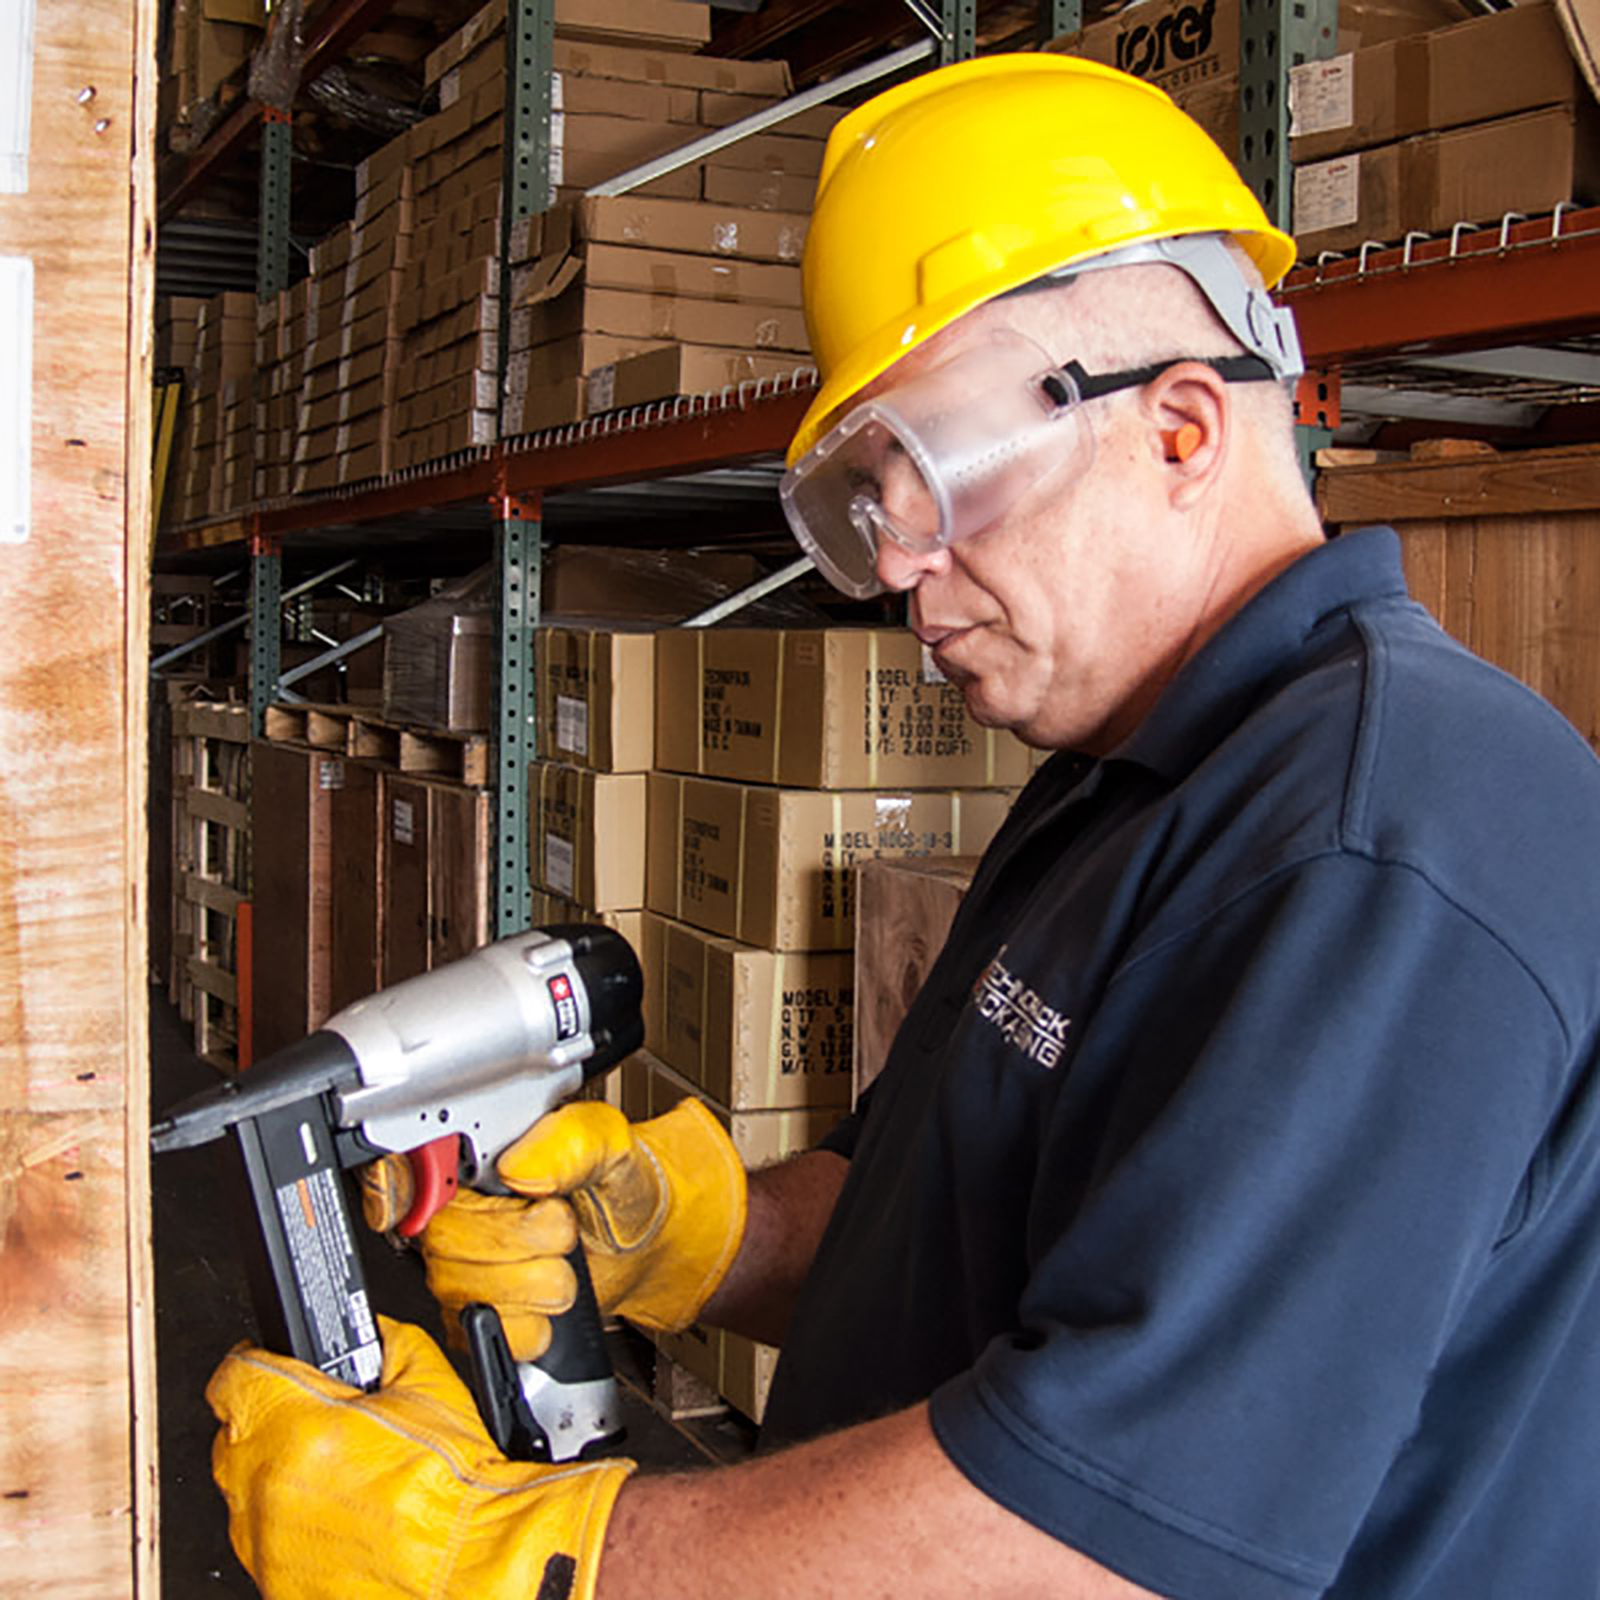 A worker wearing JORESTECH Safety Goggles for Impact Protection while drilling a crate in a warehouse setting